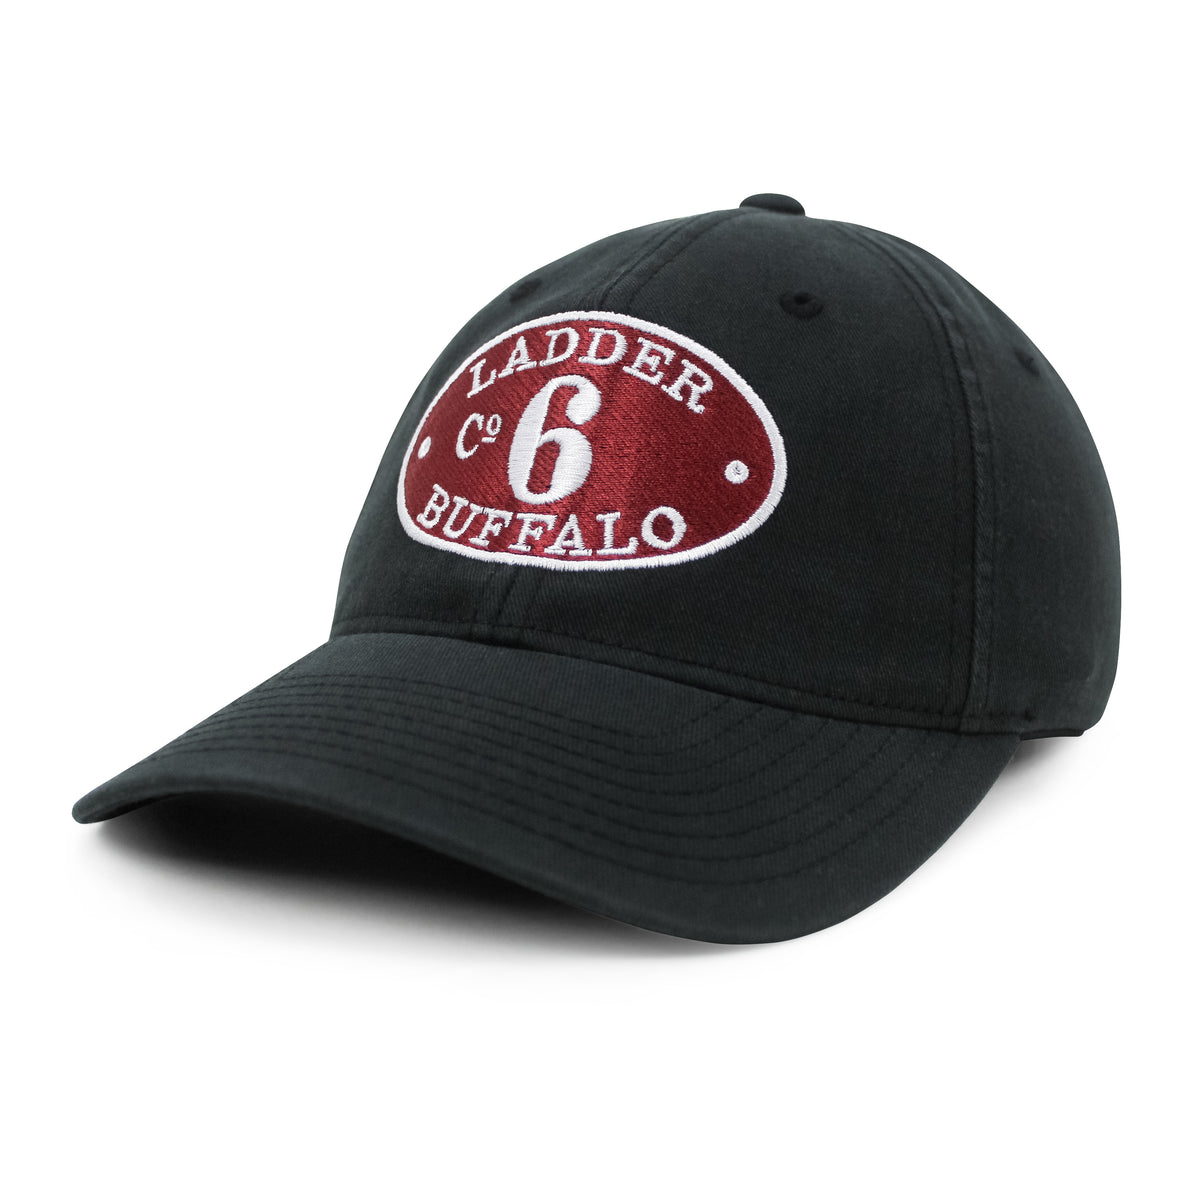 Flexfit 6997 Garment Washed Hat (Flexible Fitted) w/ Fire Mark Design - *DISCONTINUED - XL/XXL BLACK ONLY